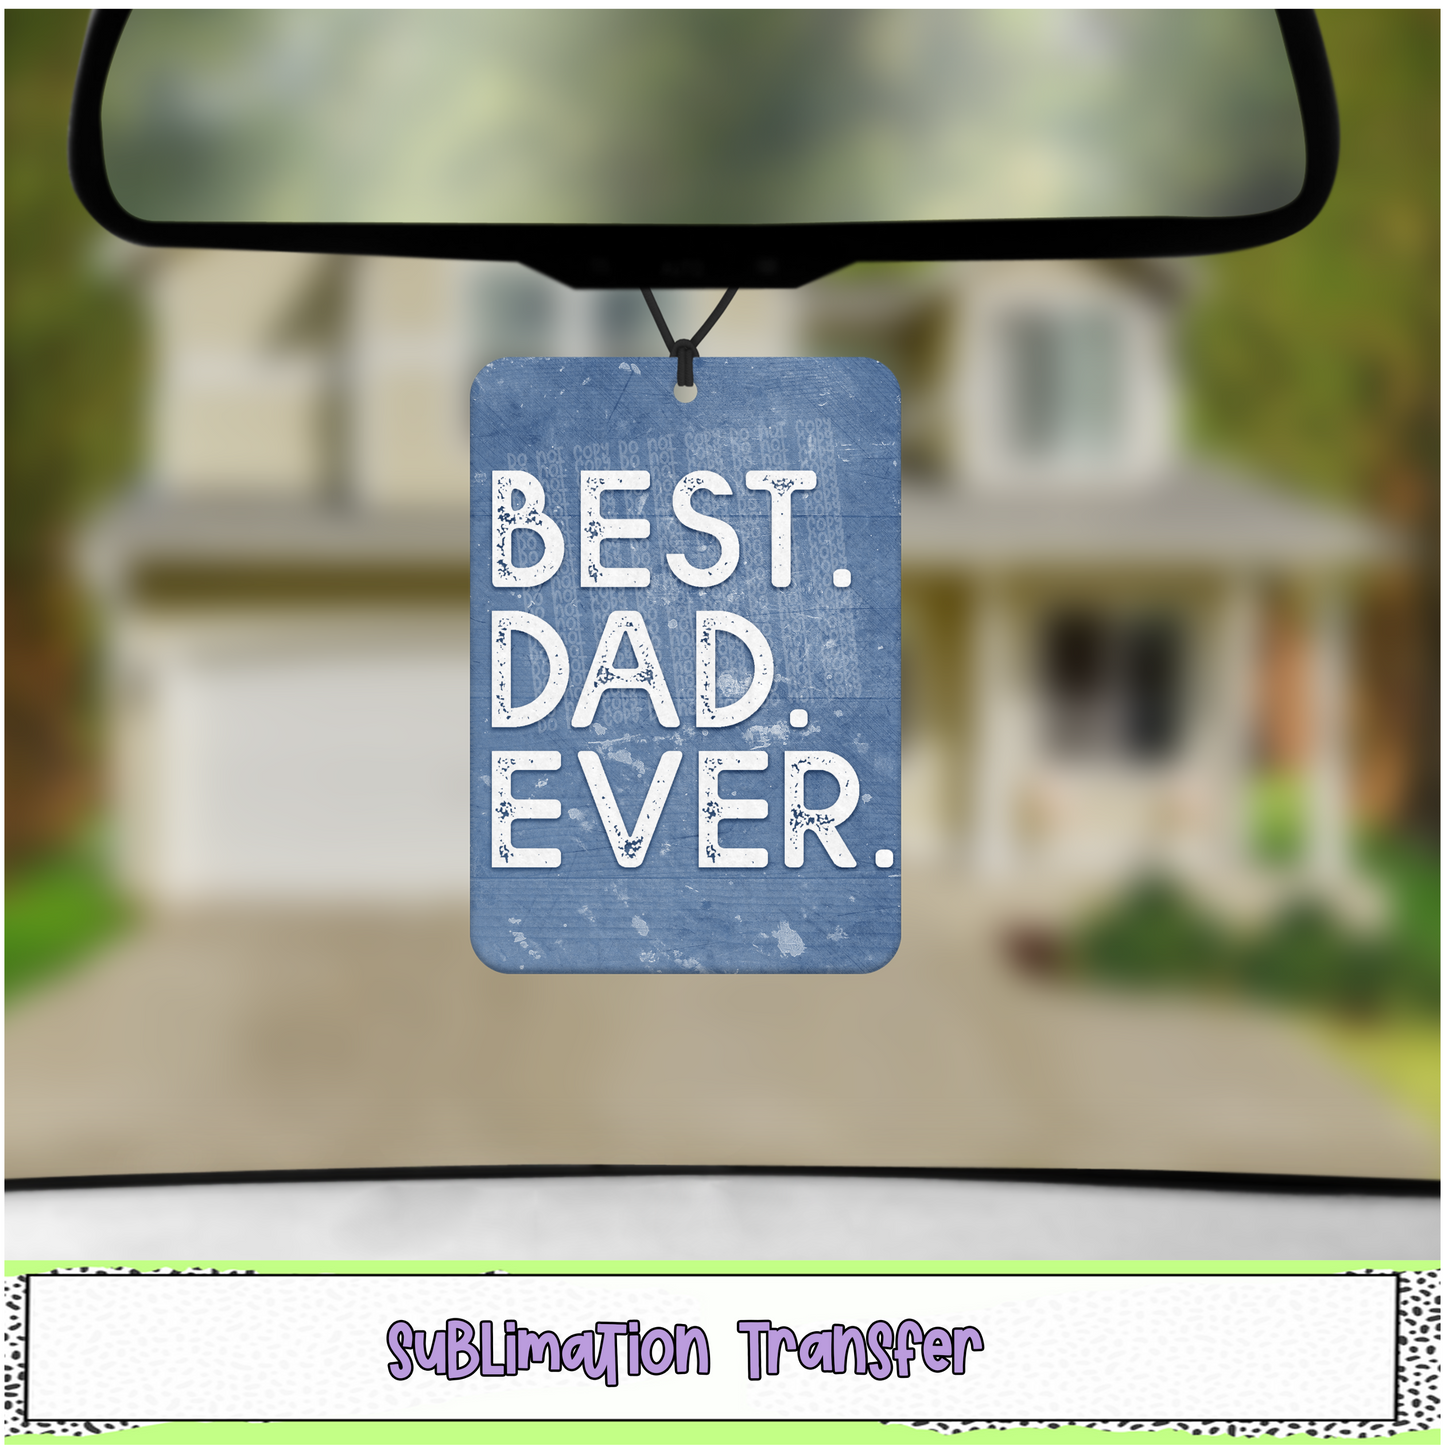 Best Dad Ever - Air Freshener Sublimation Transfer - RTS